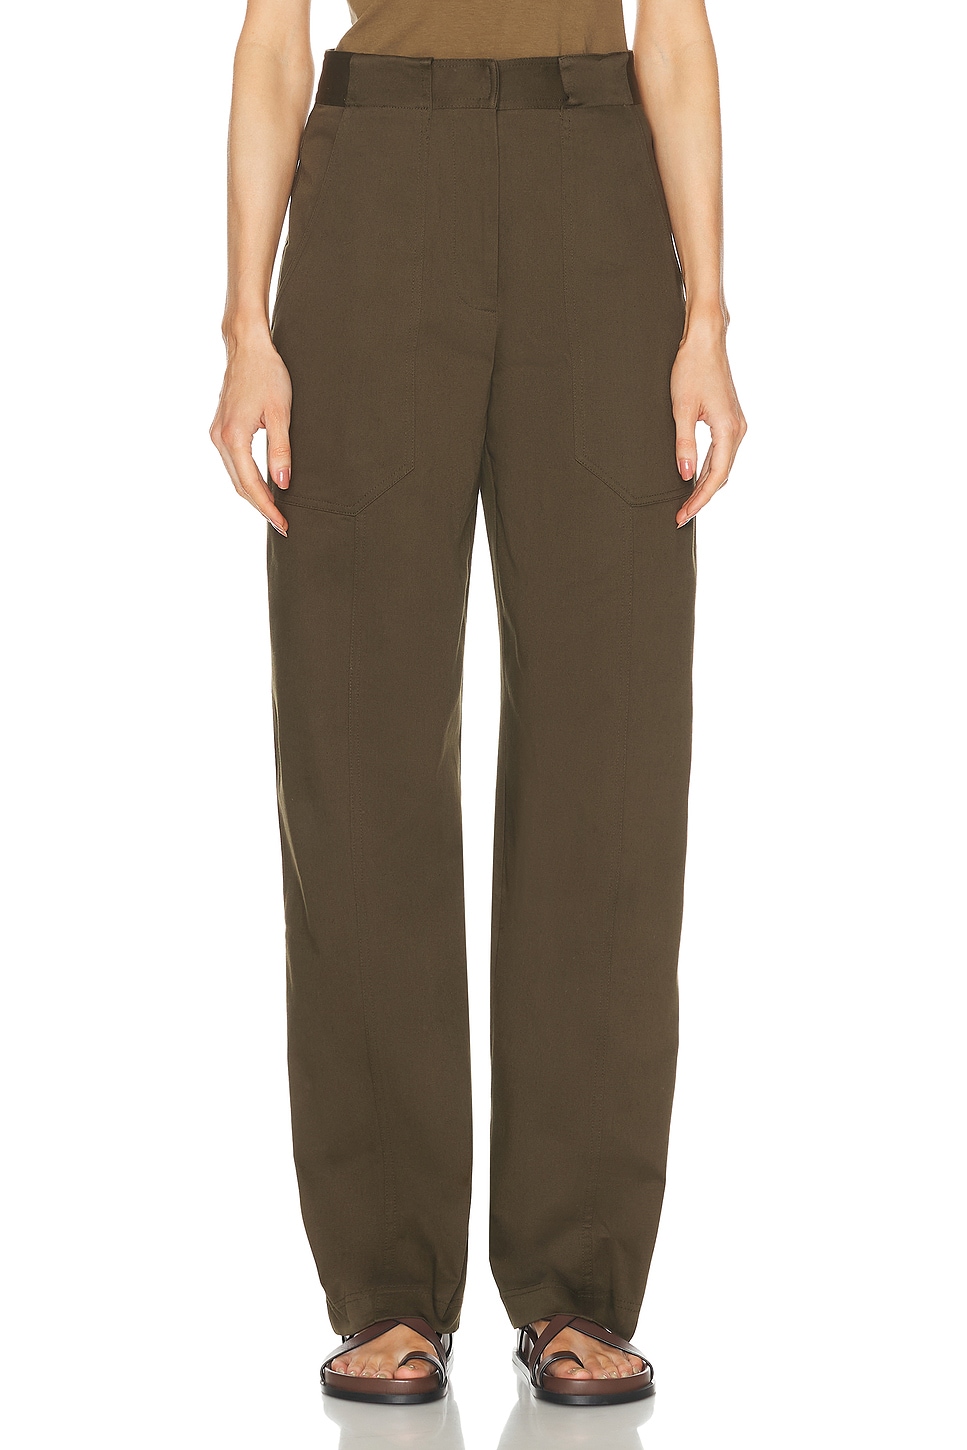 Image 1 of Matteau Utility Trouser in Olive